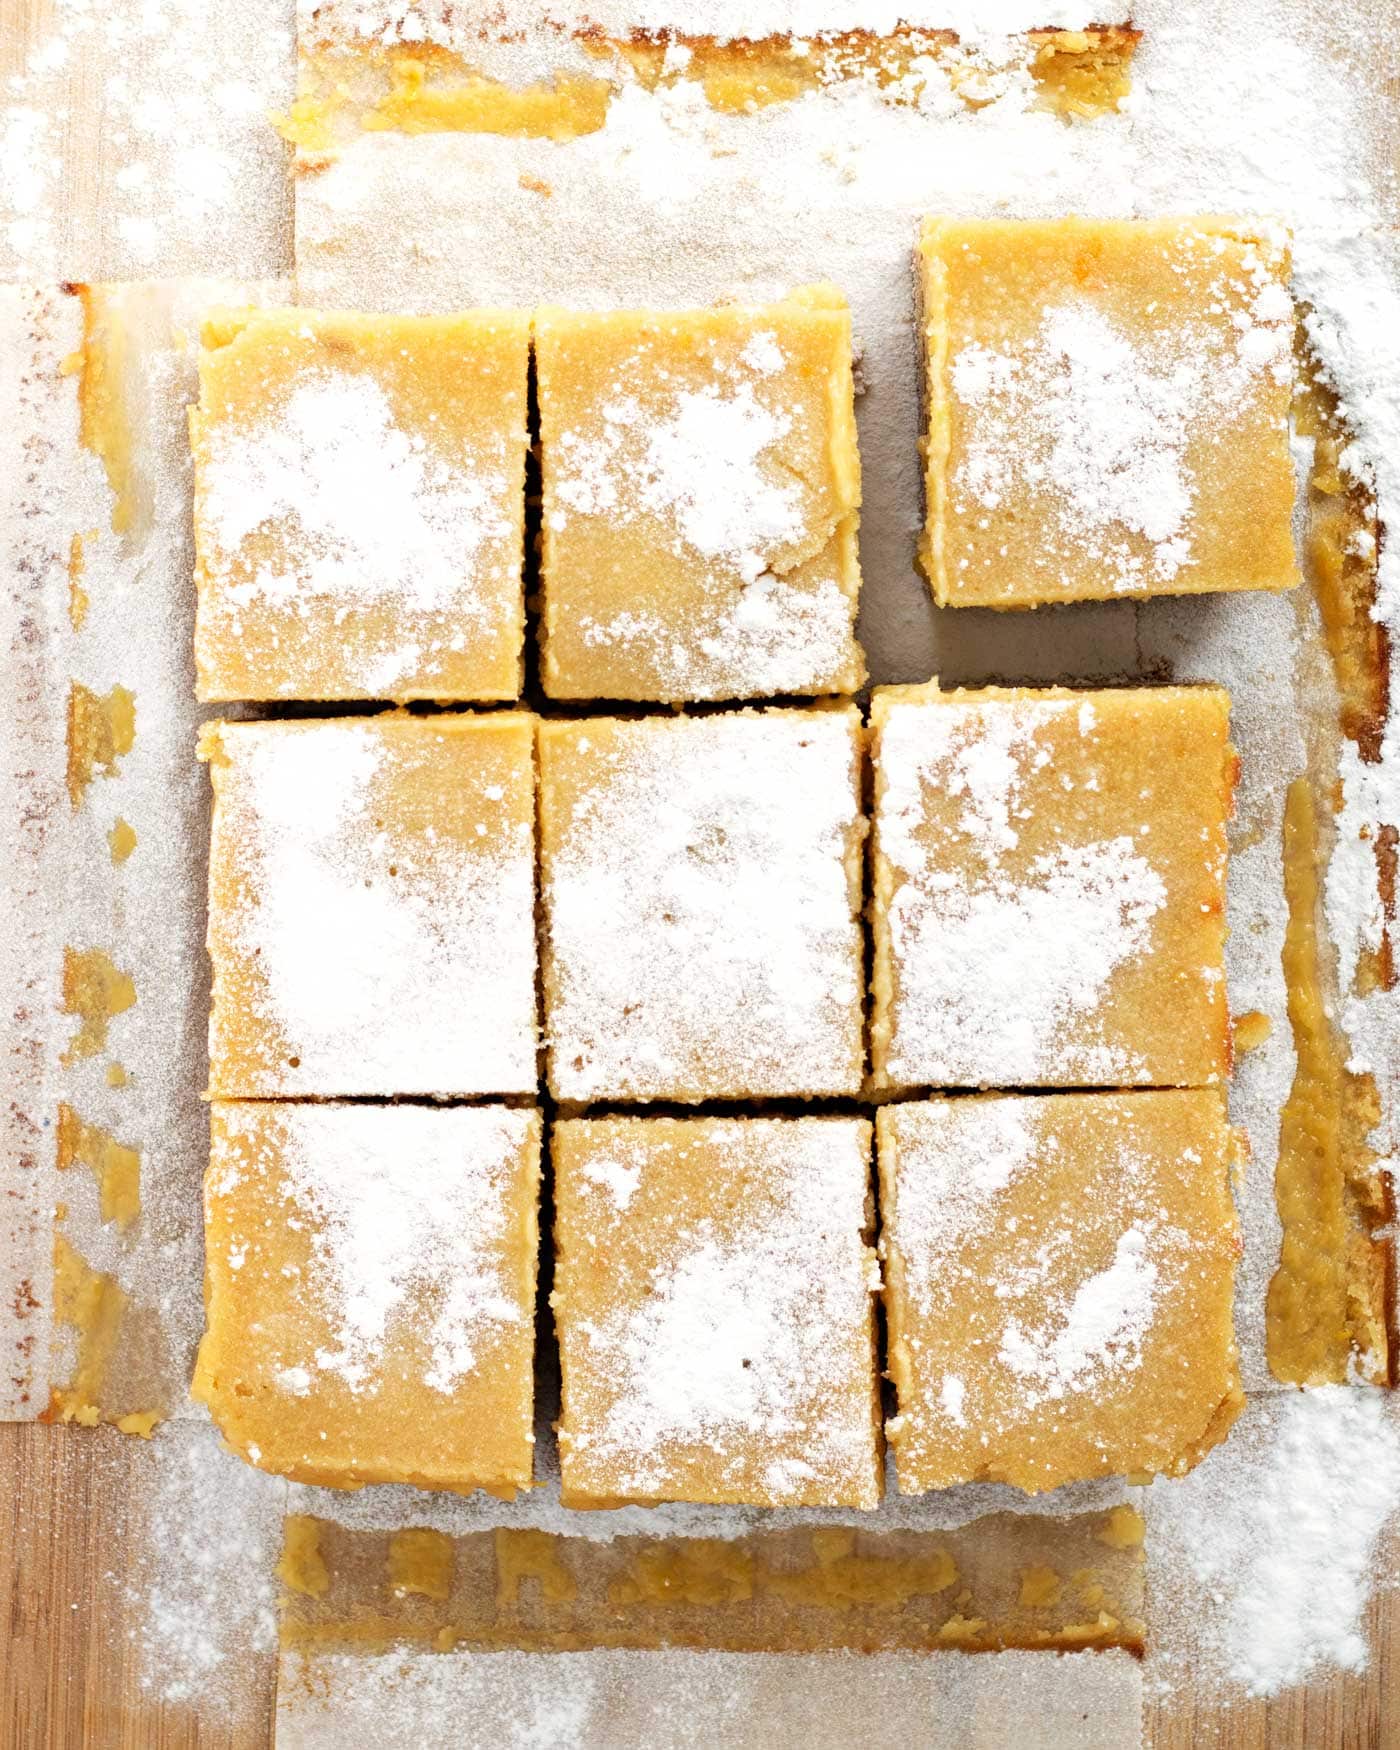 So easy to make! These lemon bars are paleo, gluten free, dairy free, and naturally sweetened with honey and coconut sugar!